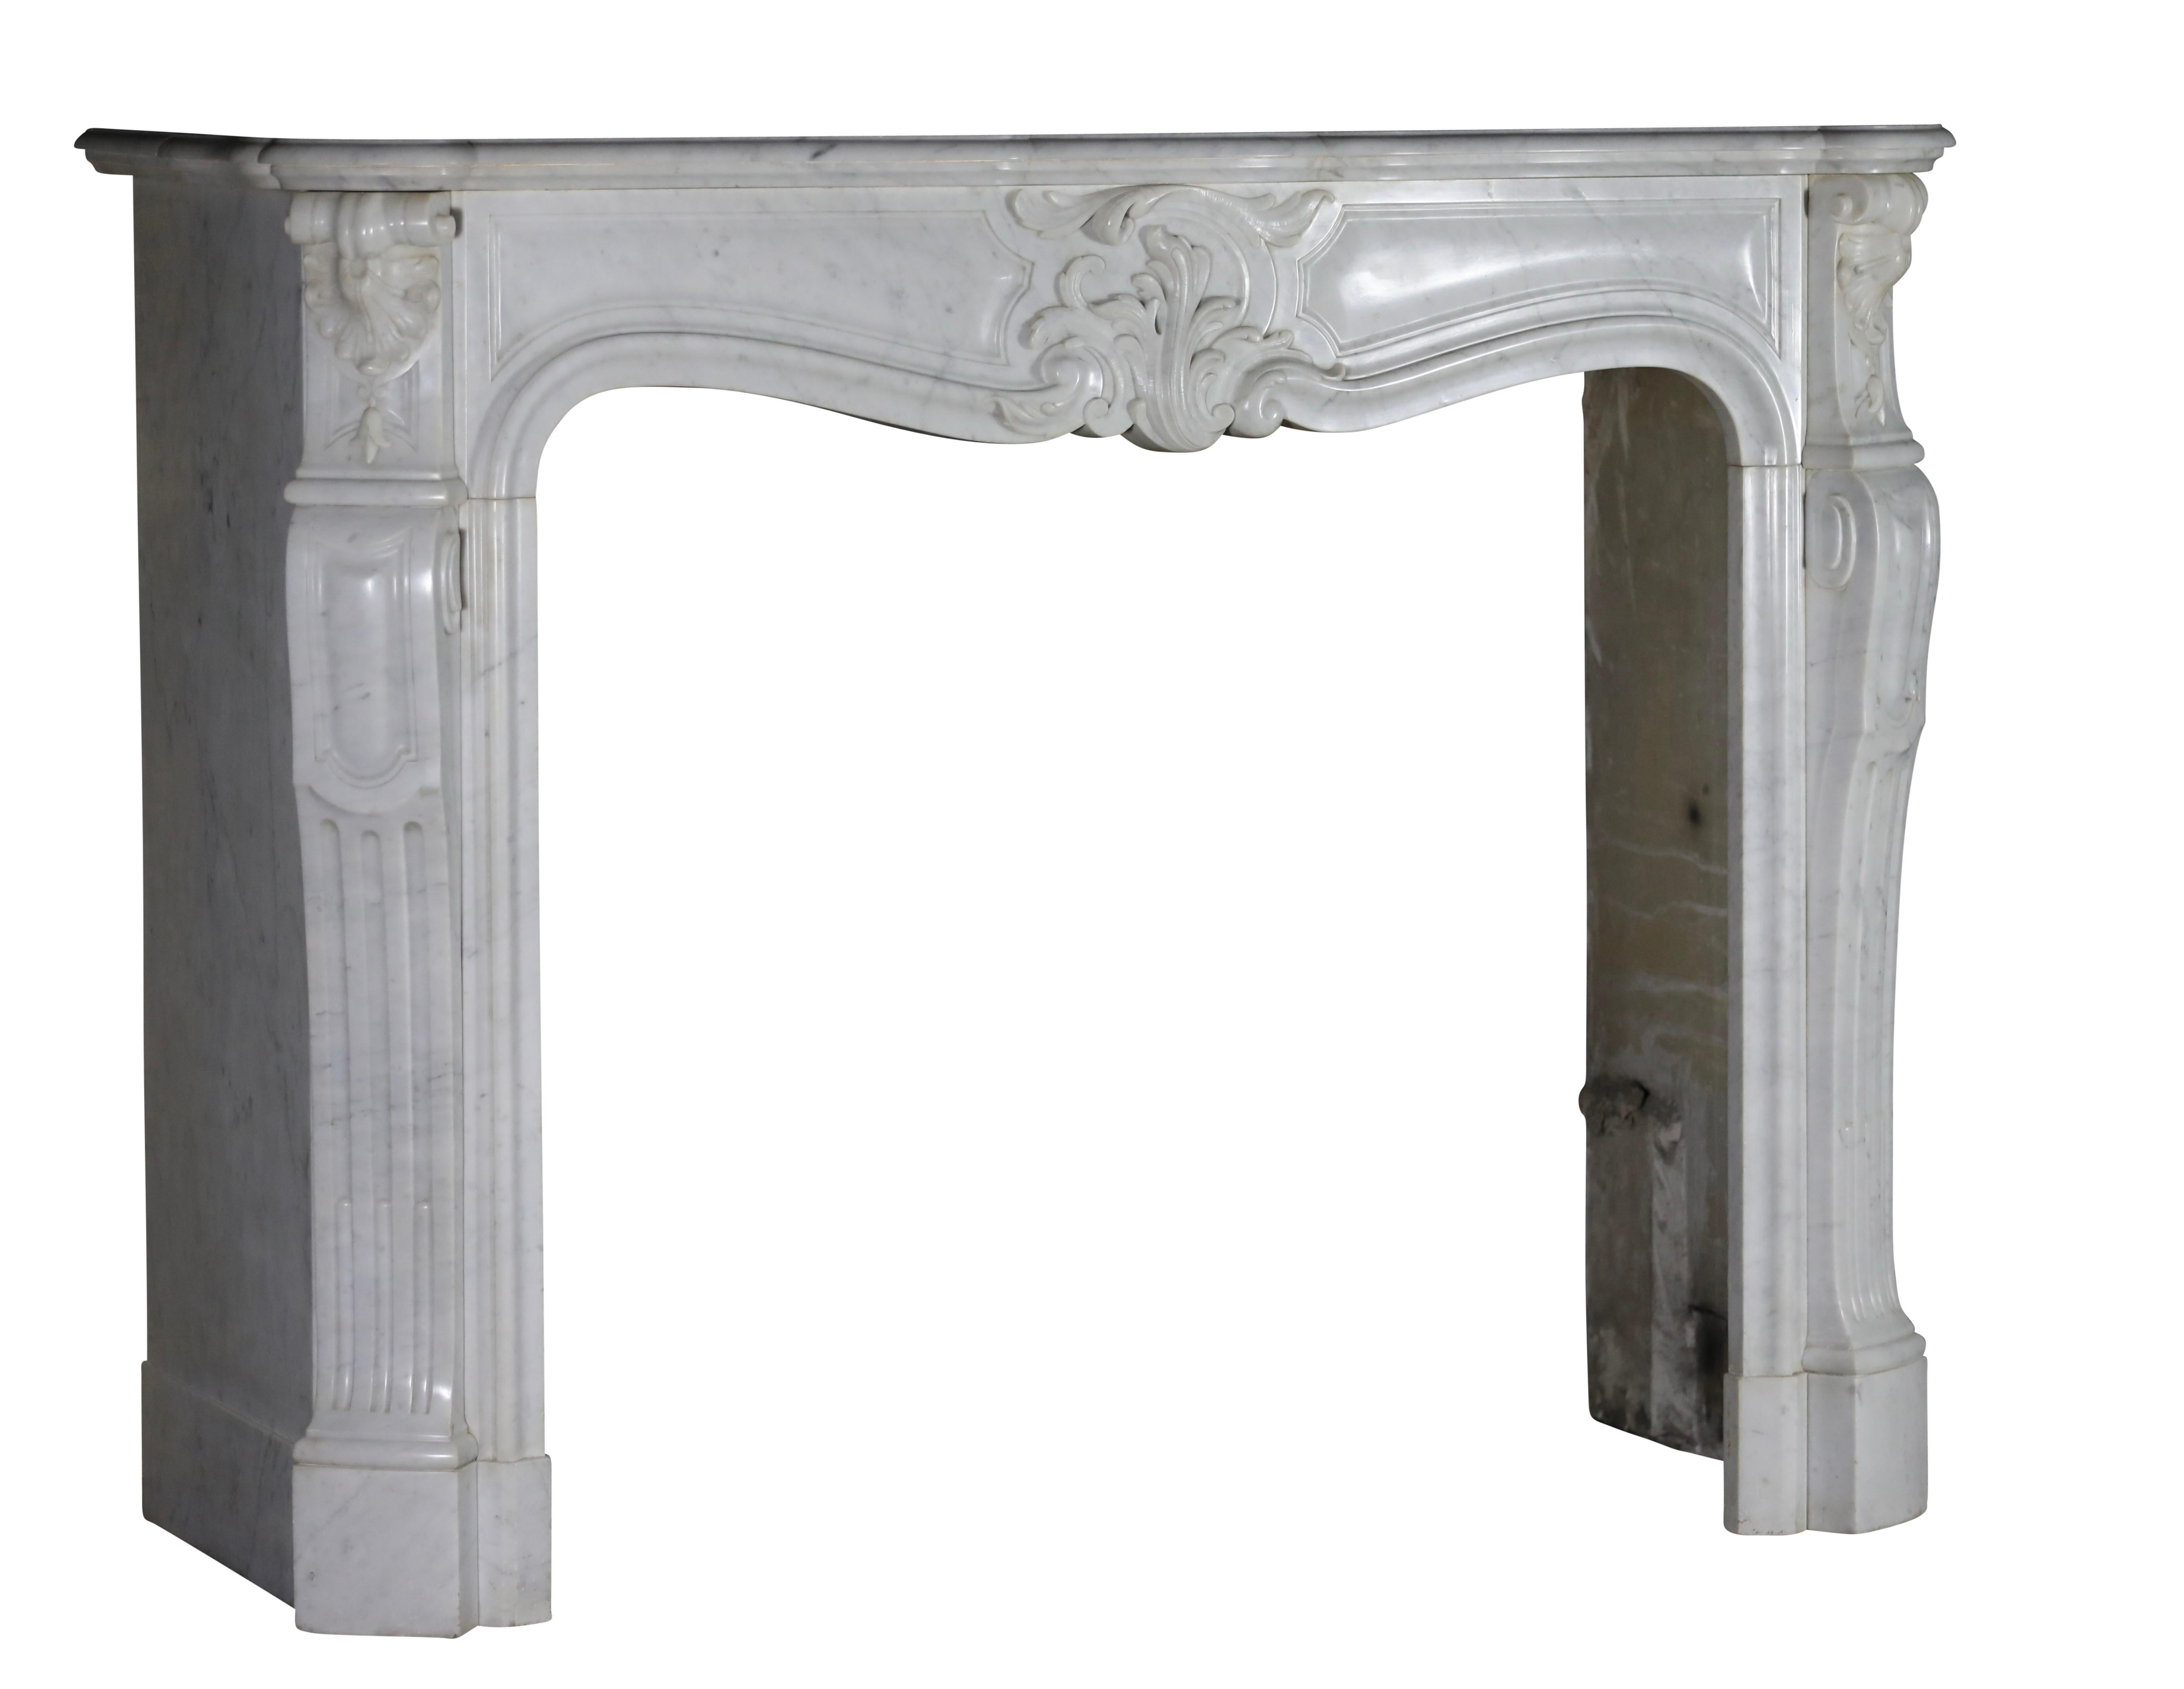 fireplace surrounds for sale near me